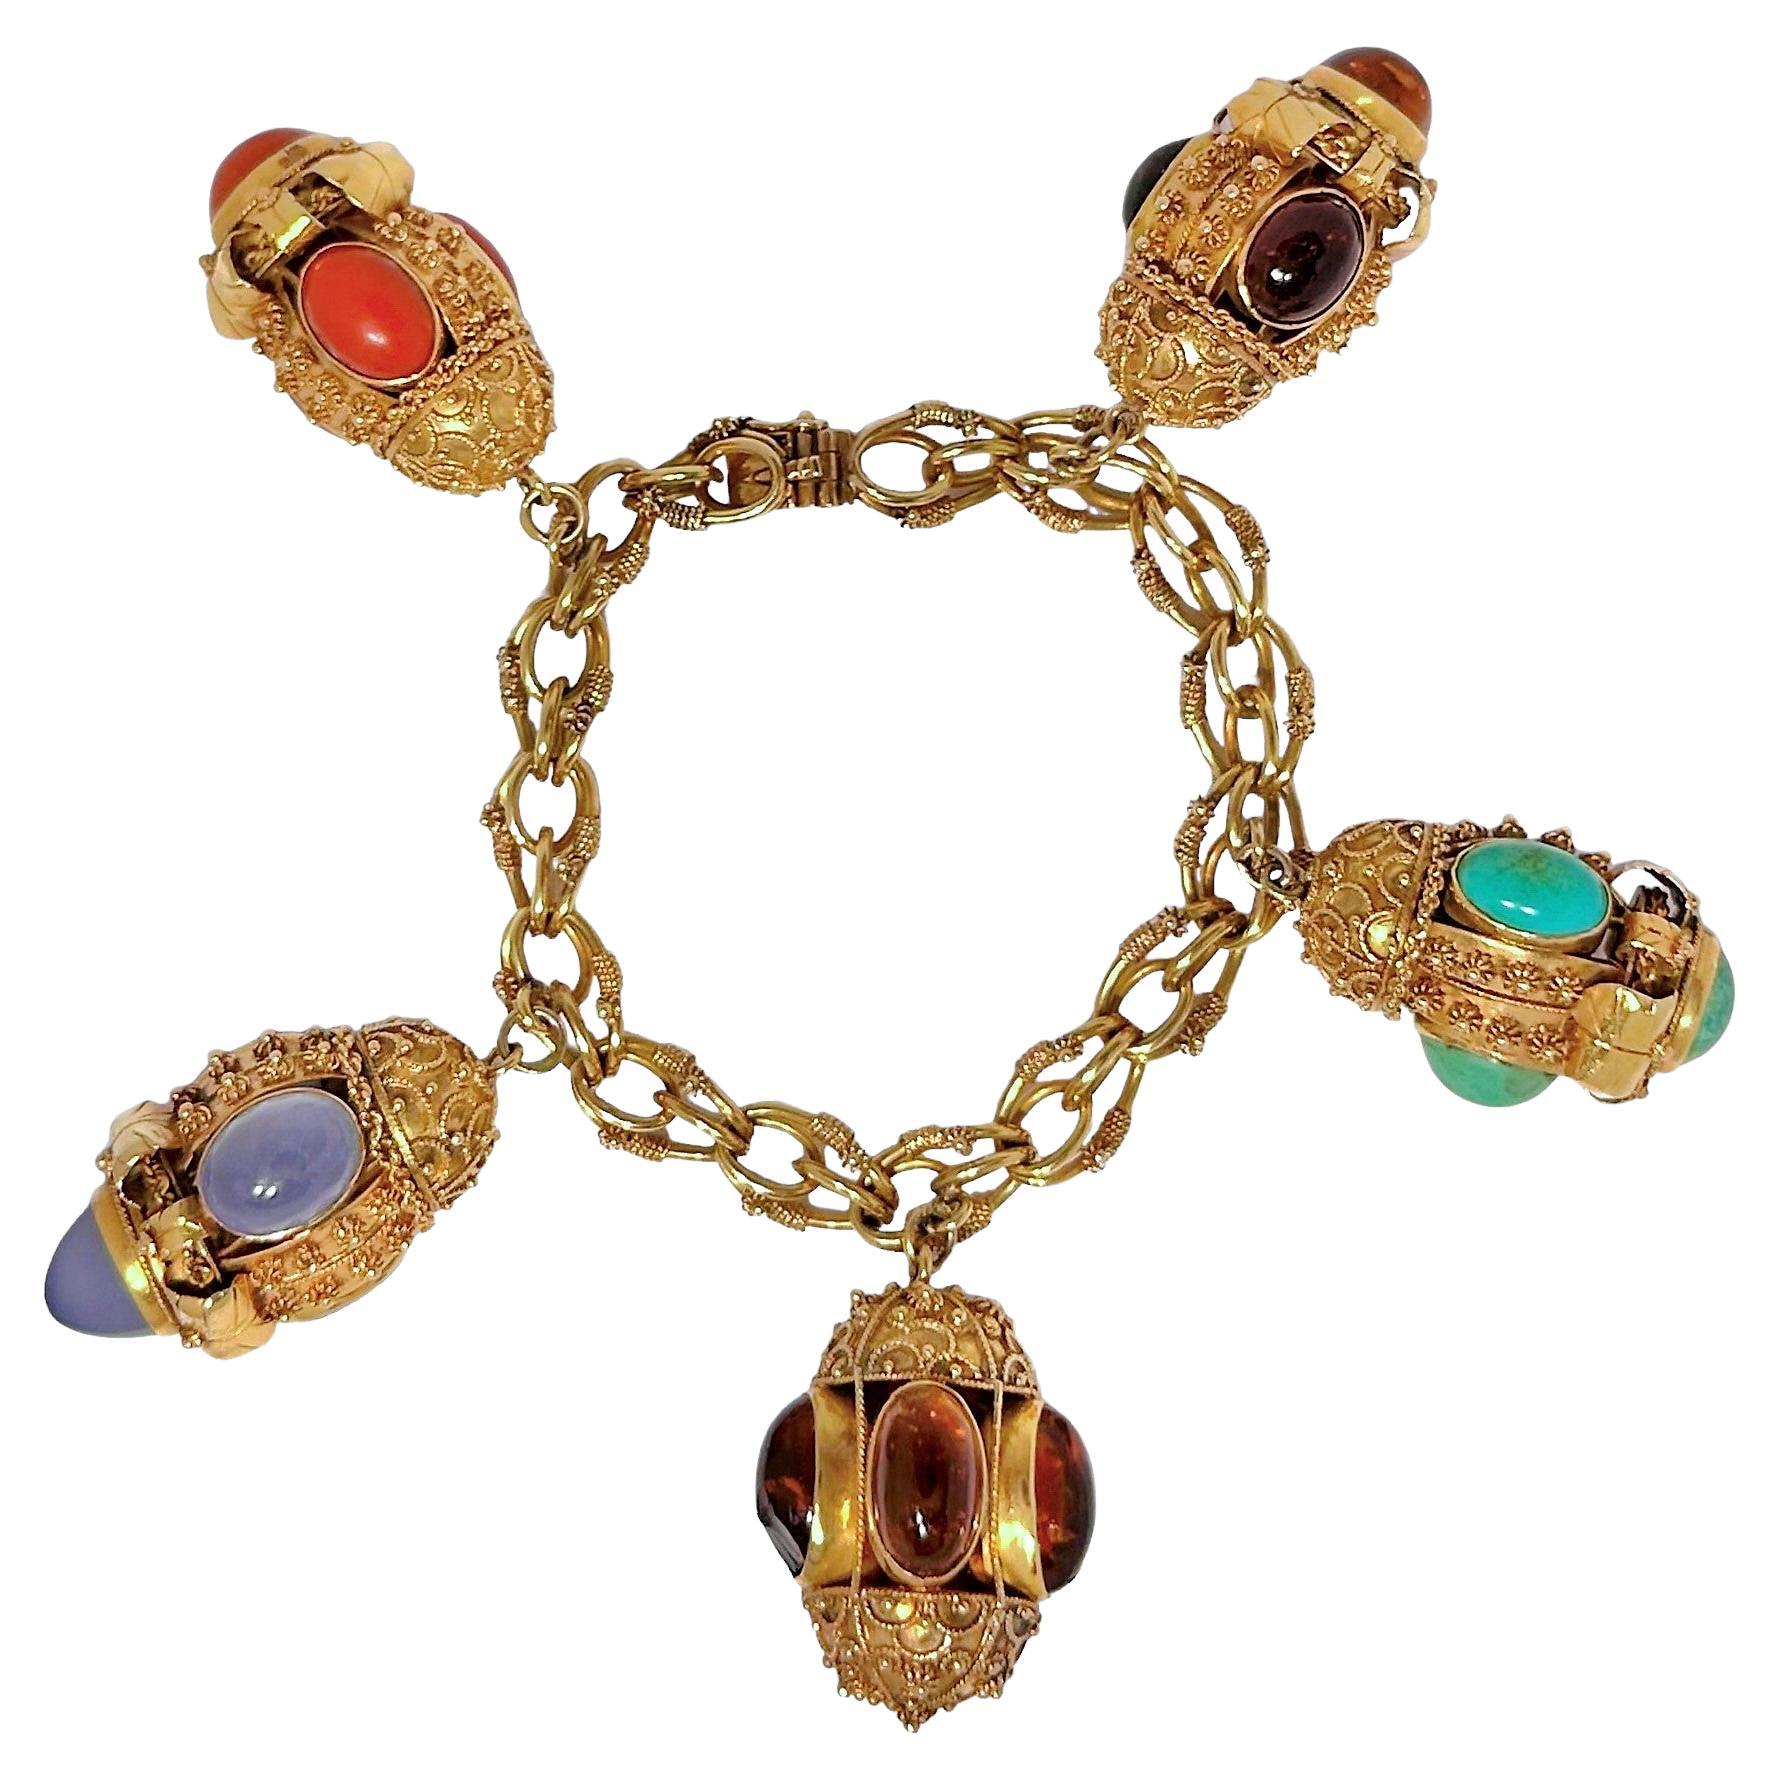 Mid-20th Century Italian 18k Gold Etruscan Revival Charm Bracelet with 5 Charms For Sale